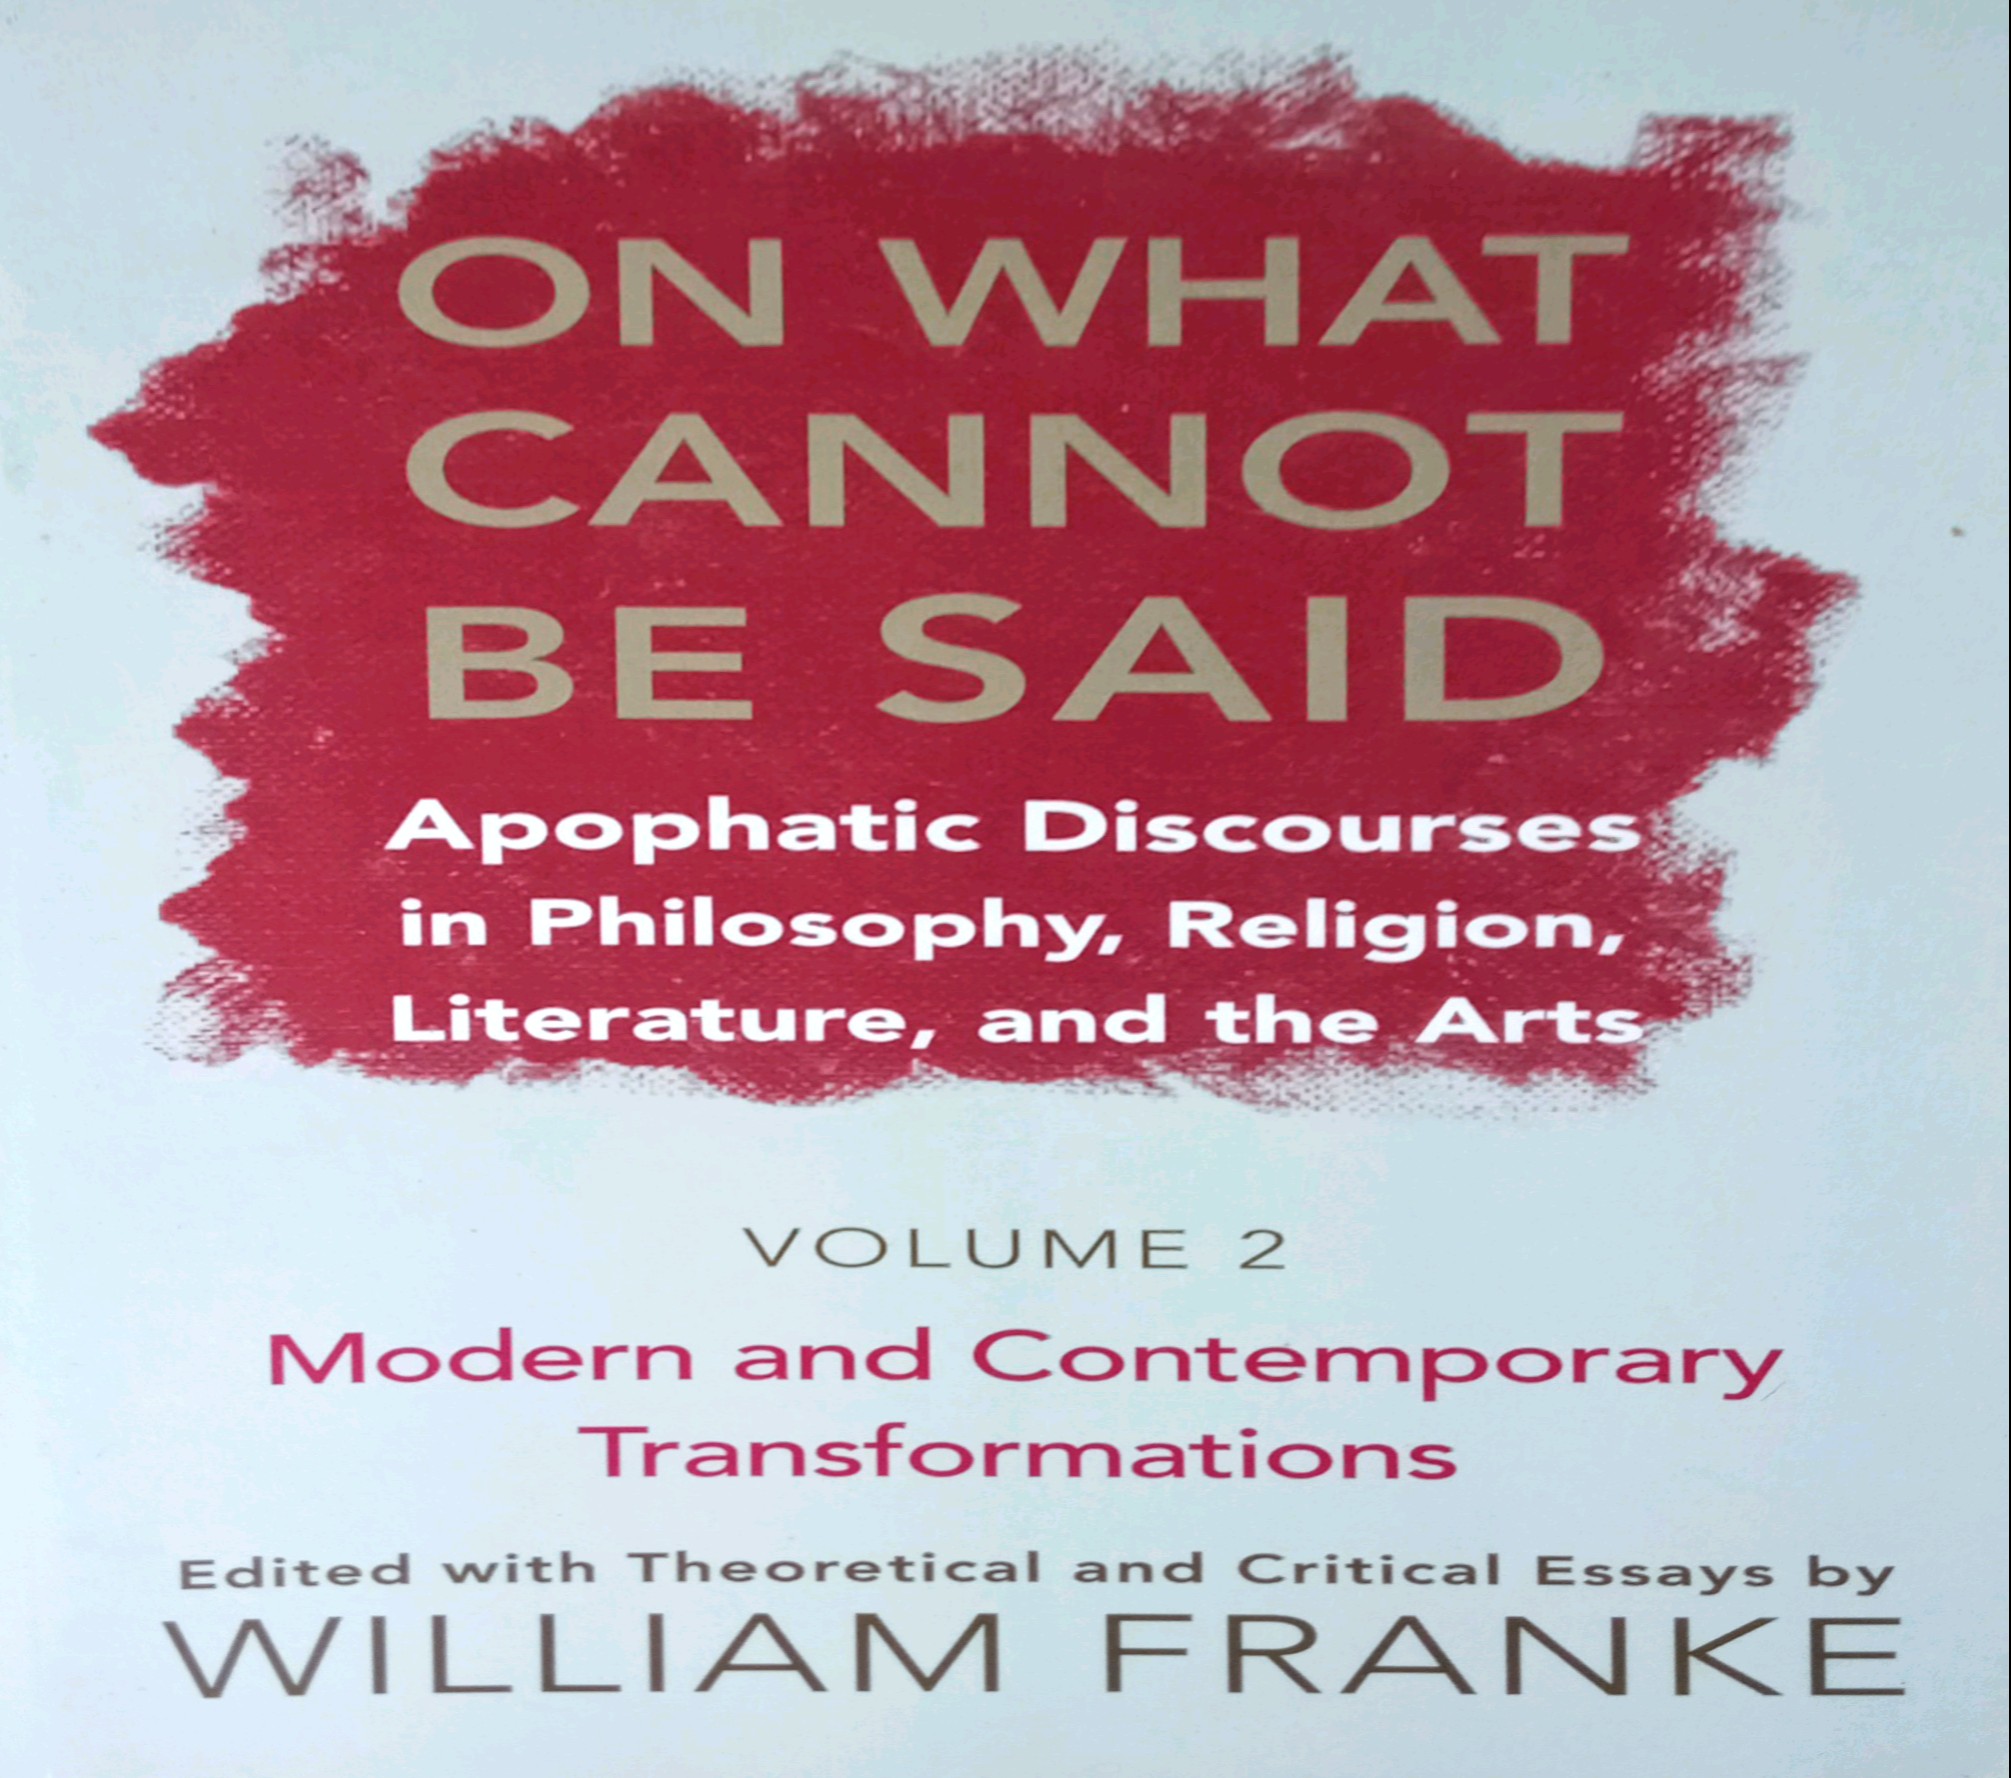 ON WHAT CANNOT BE SAID: APOPHATIC DISCOURSES IN PHILOSOPHY, RELIGION, LITERATURE, AND THE ARTS.